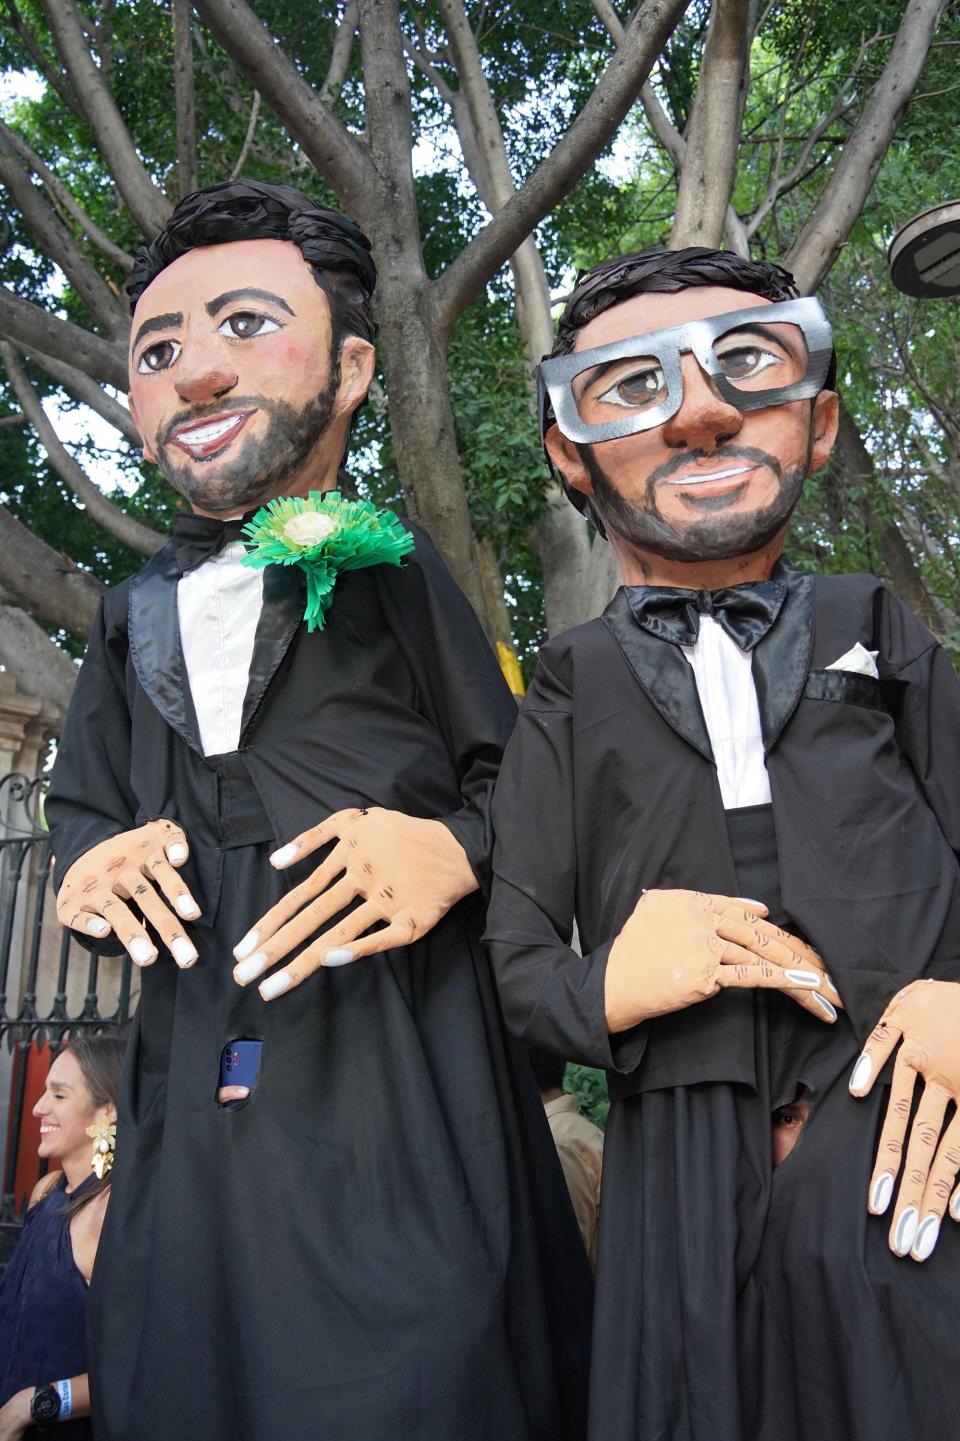 Oversized mojigangas, or puppets of the grooms, kicked off the festivities on Friday night.